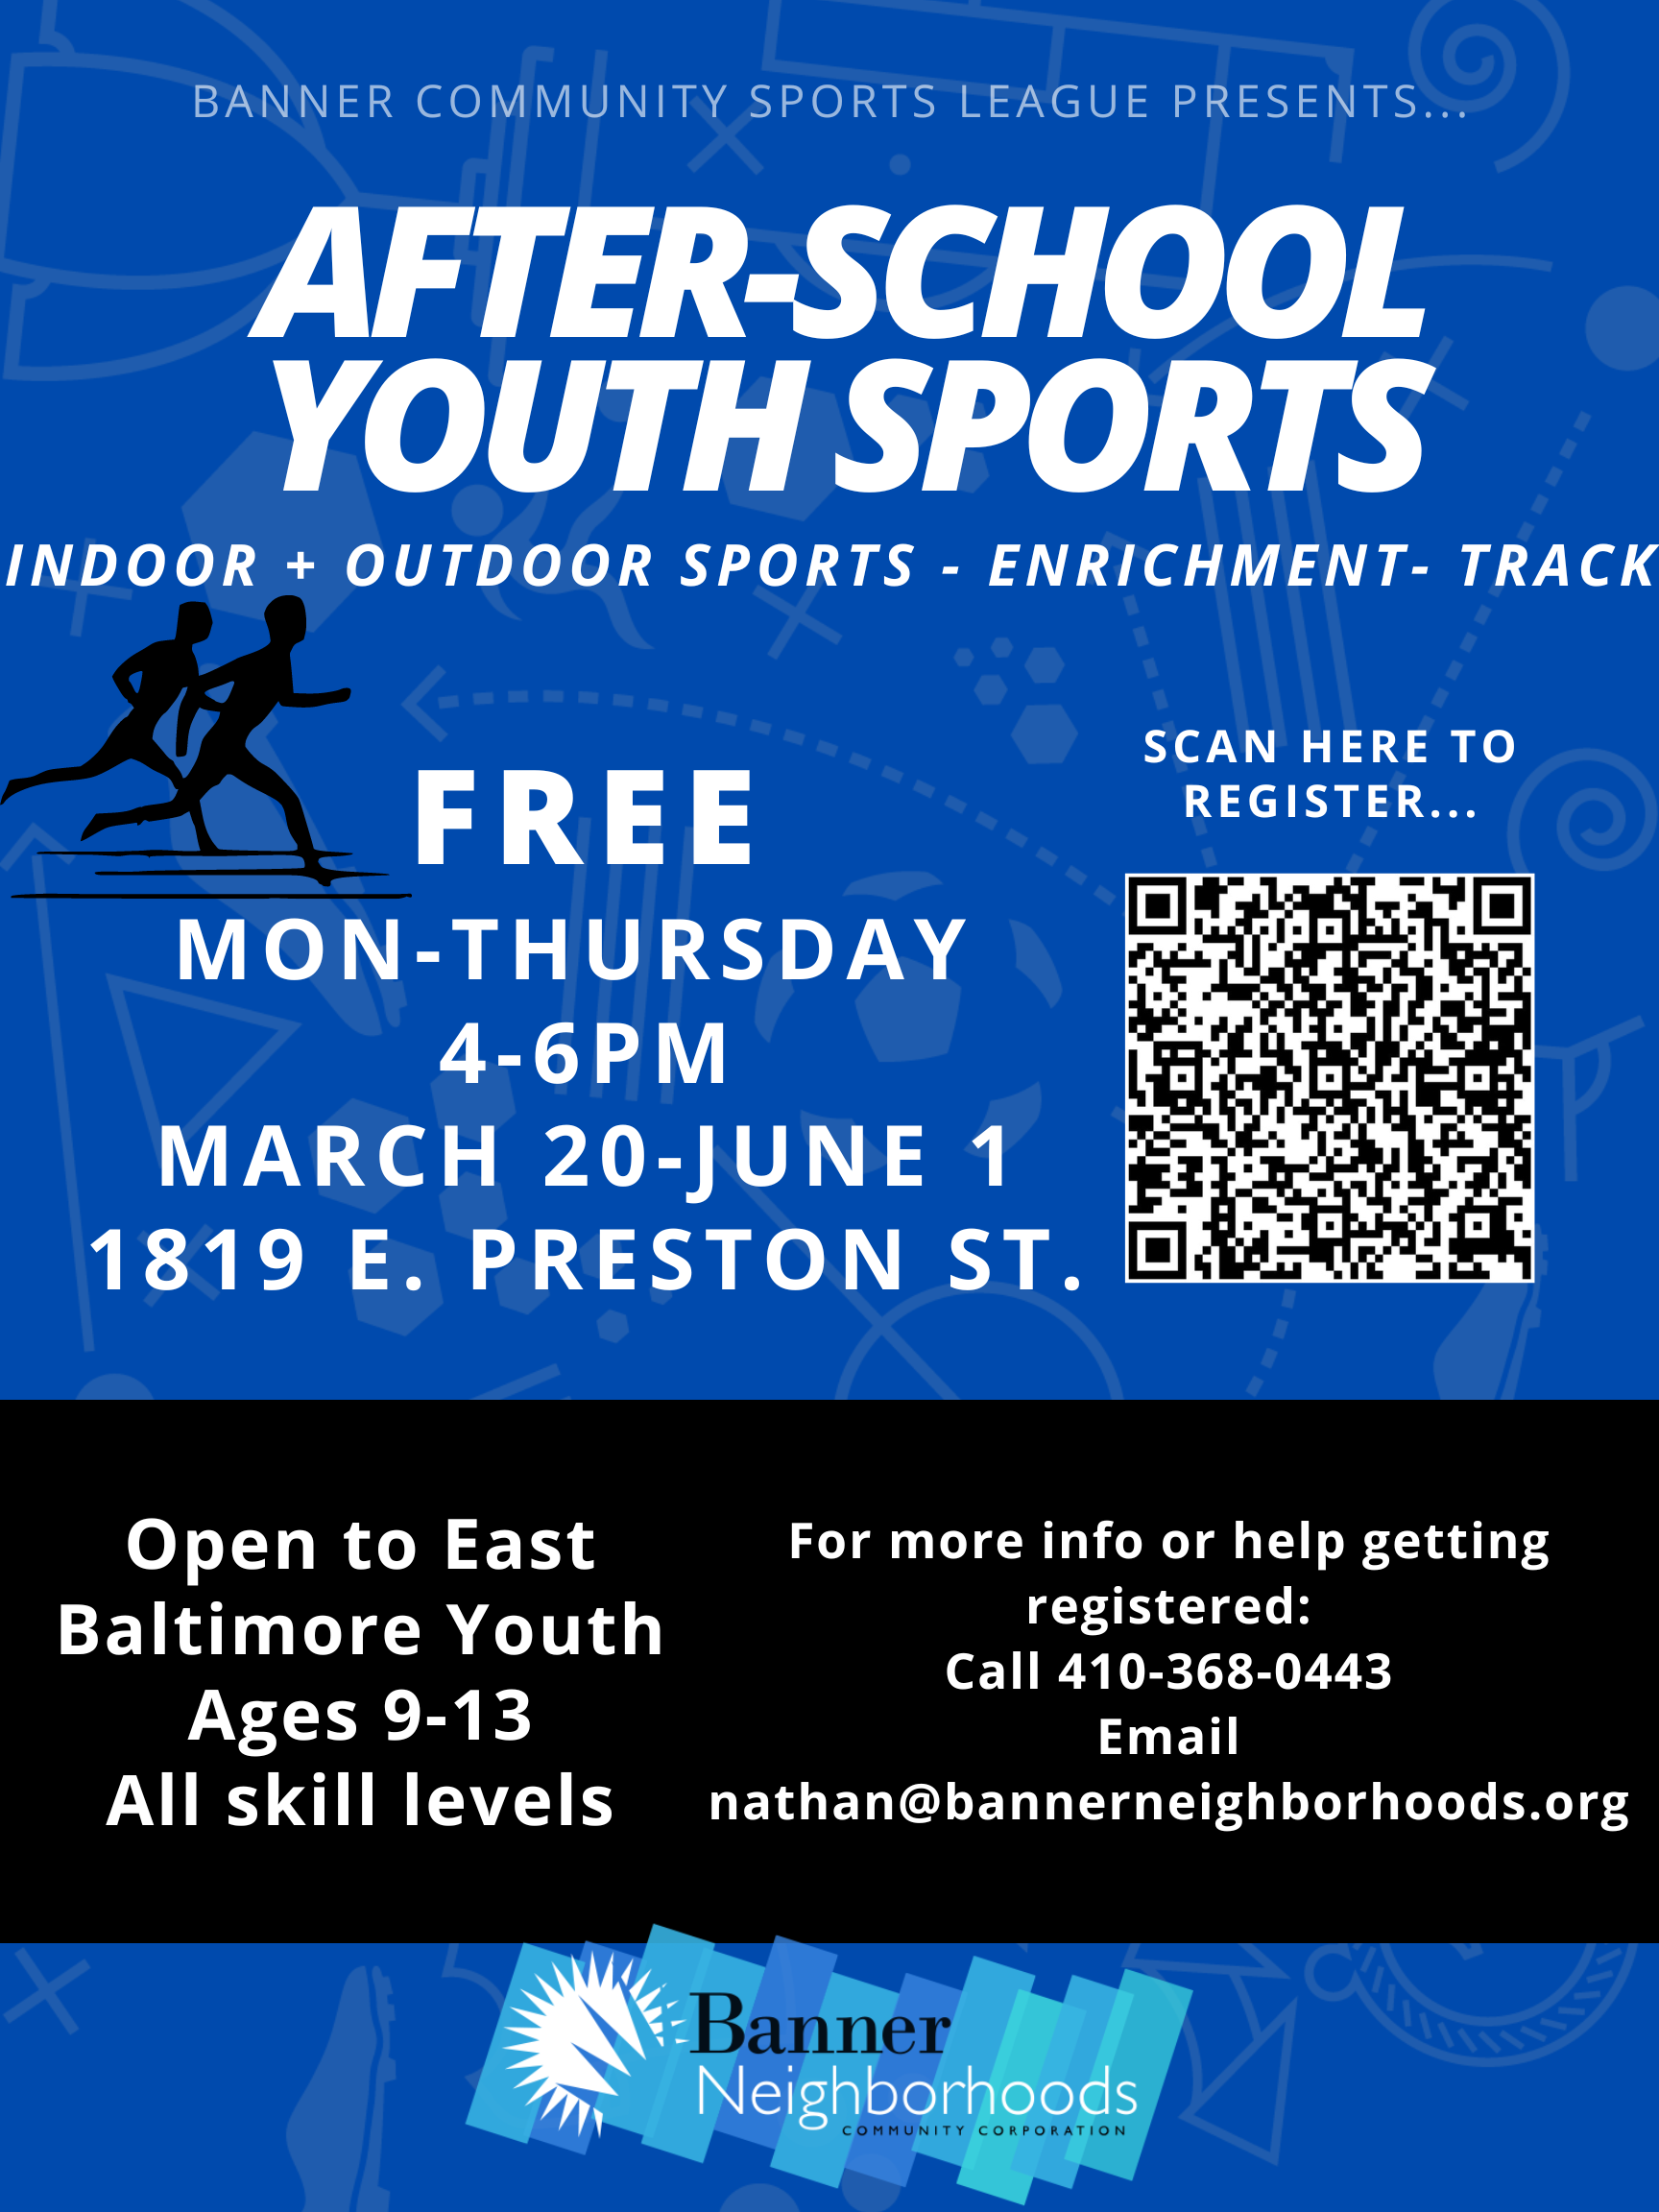 Afterschool youth sports program open to all East Baltimore children ages 9-13.